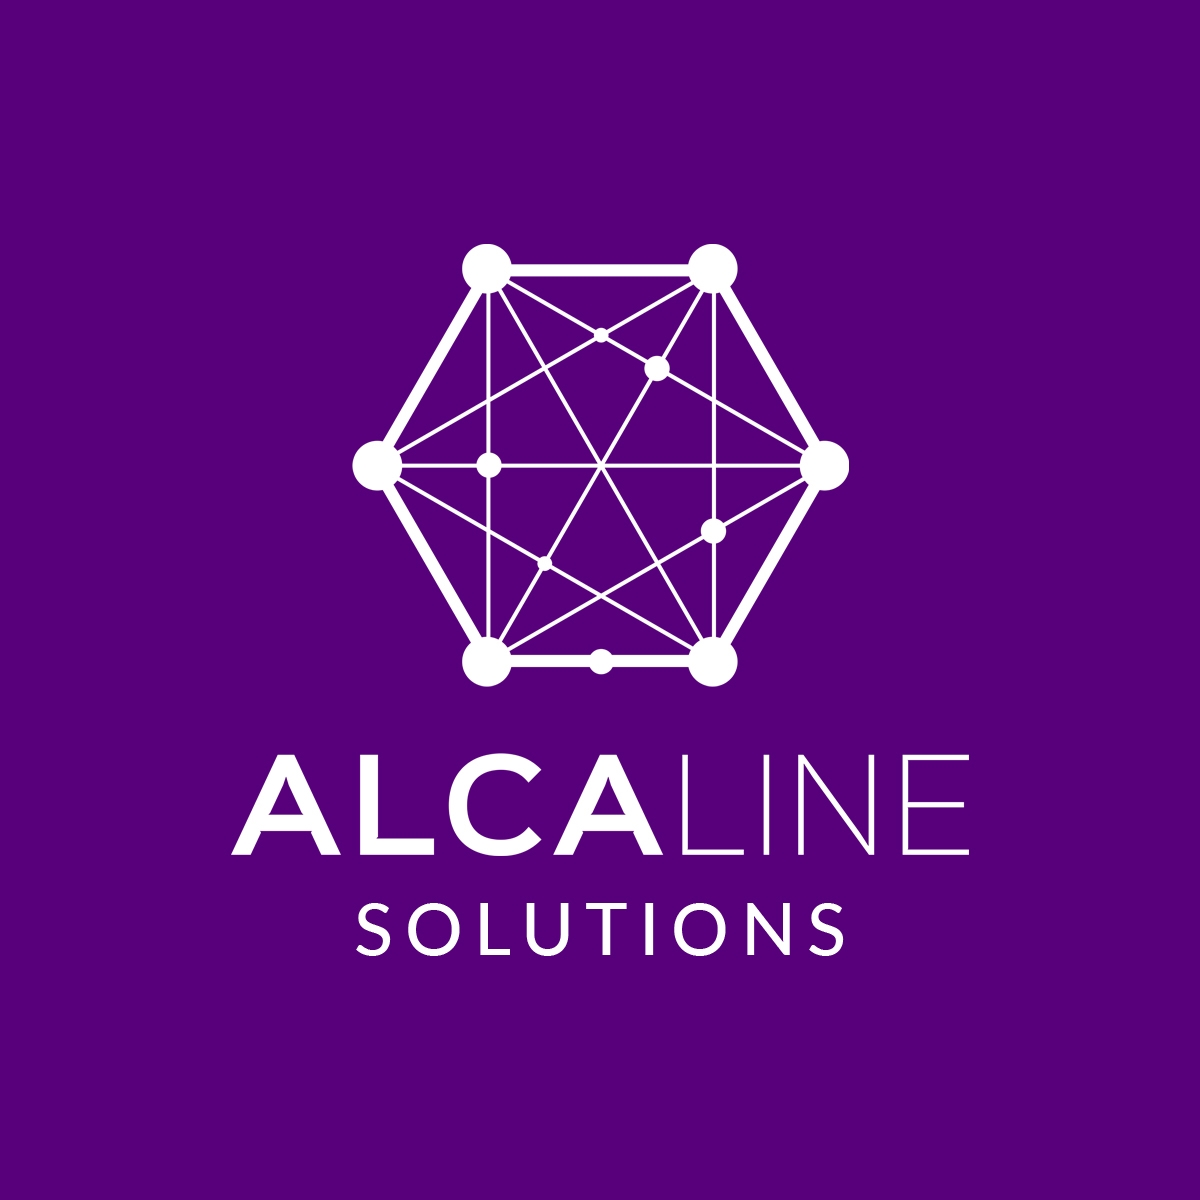 Alcaline Solutions